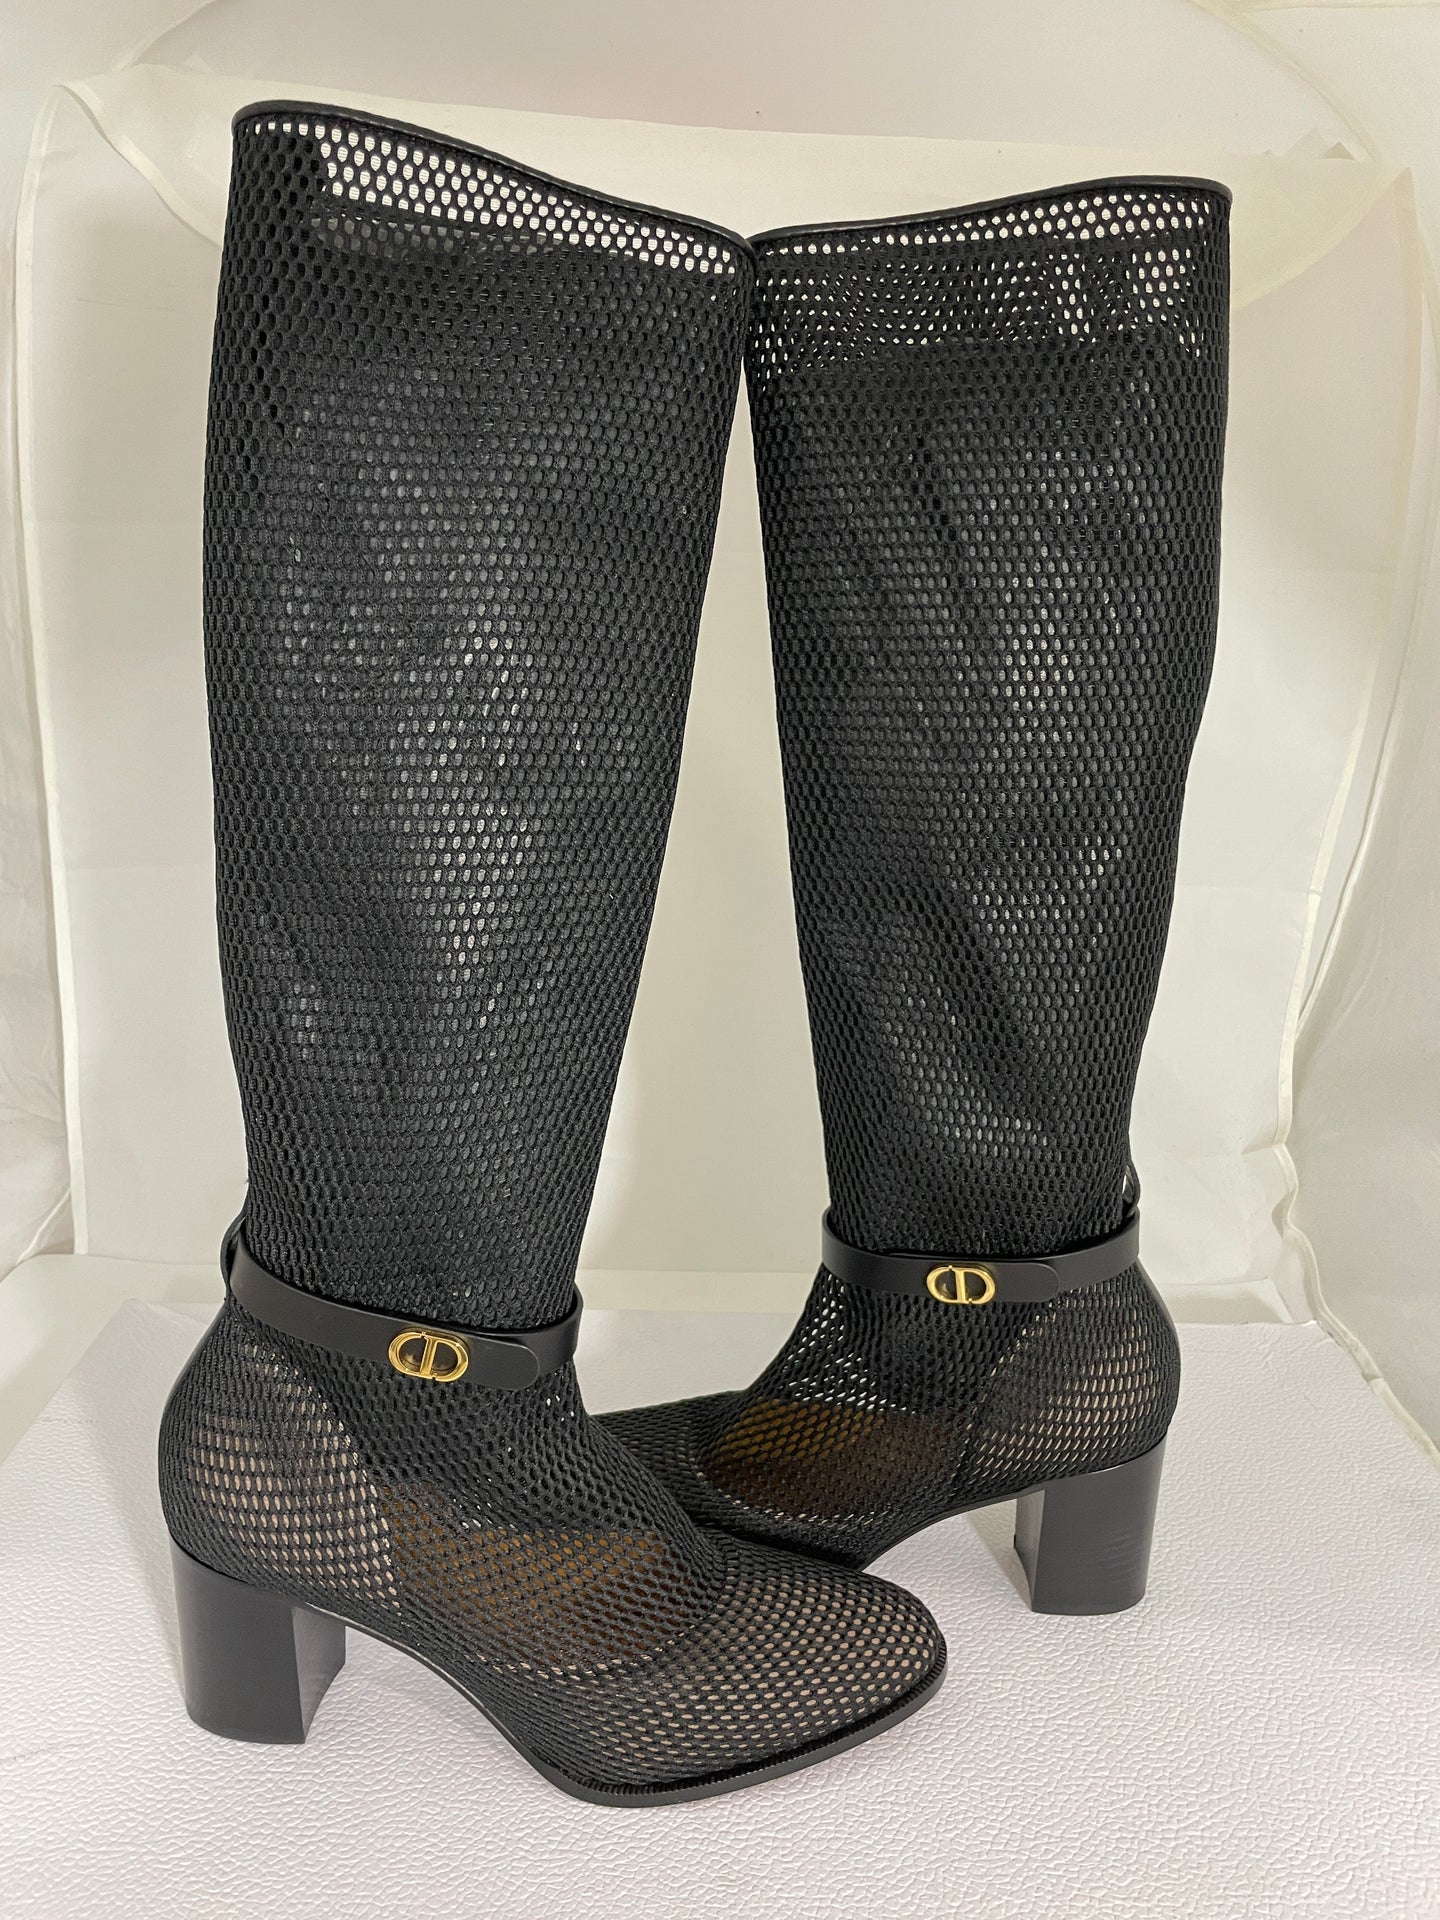 Christian Dior CD Black Empriente Mesh & Leather Boots Size 40.5